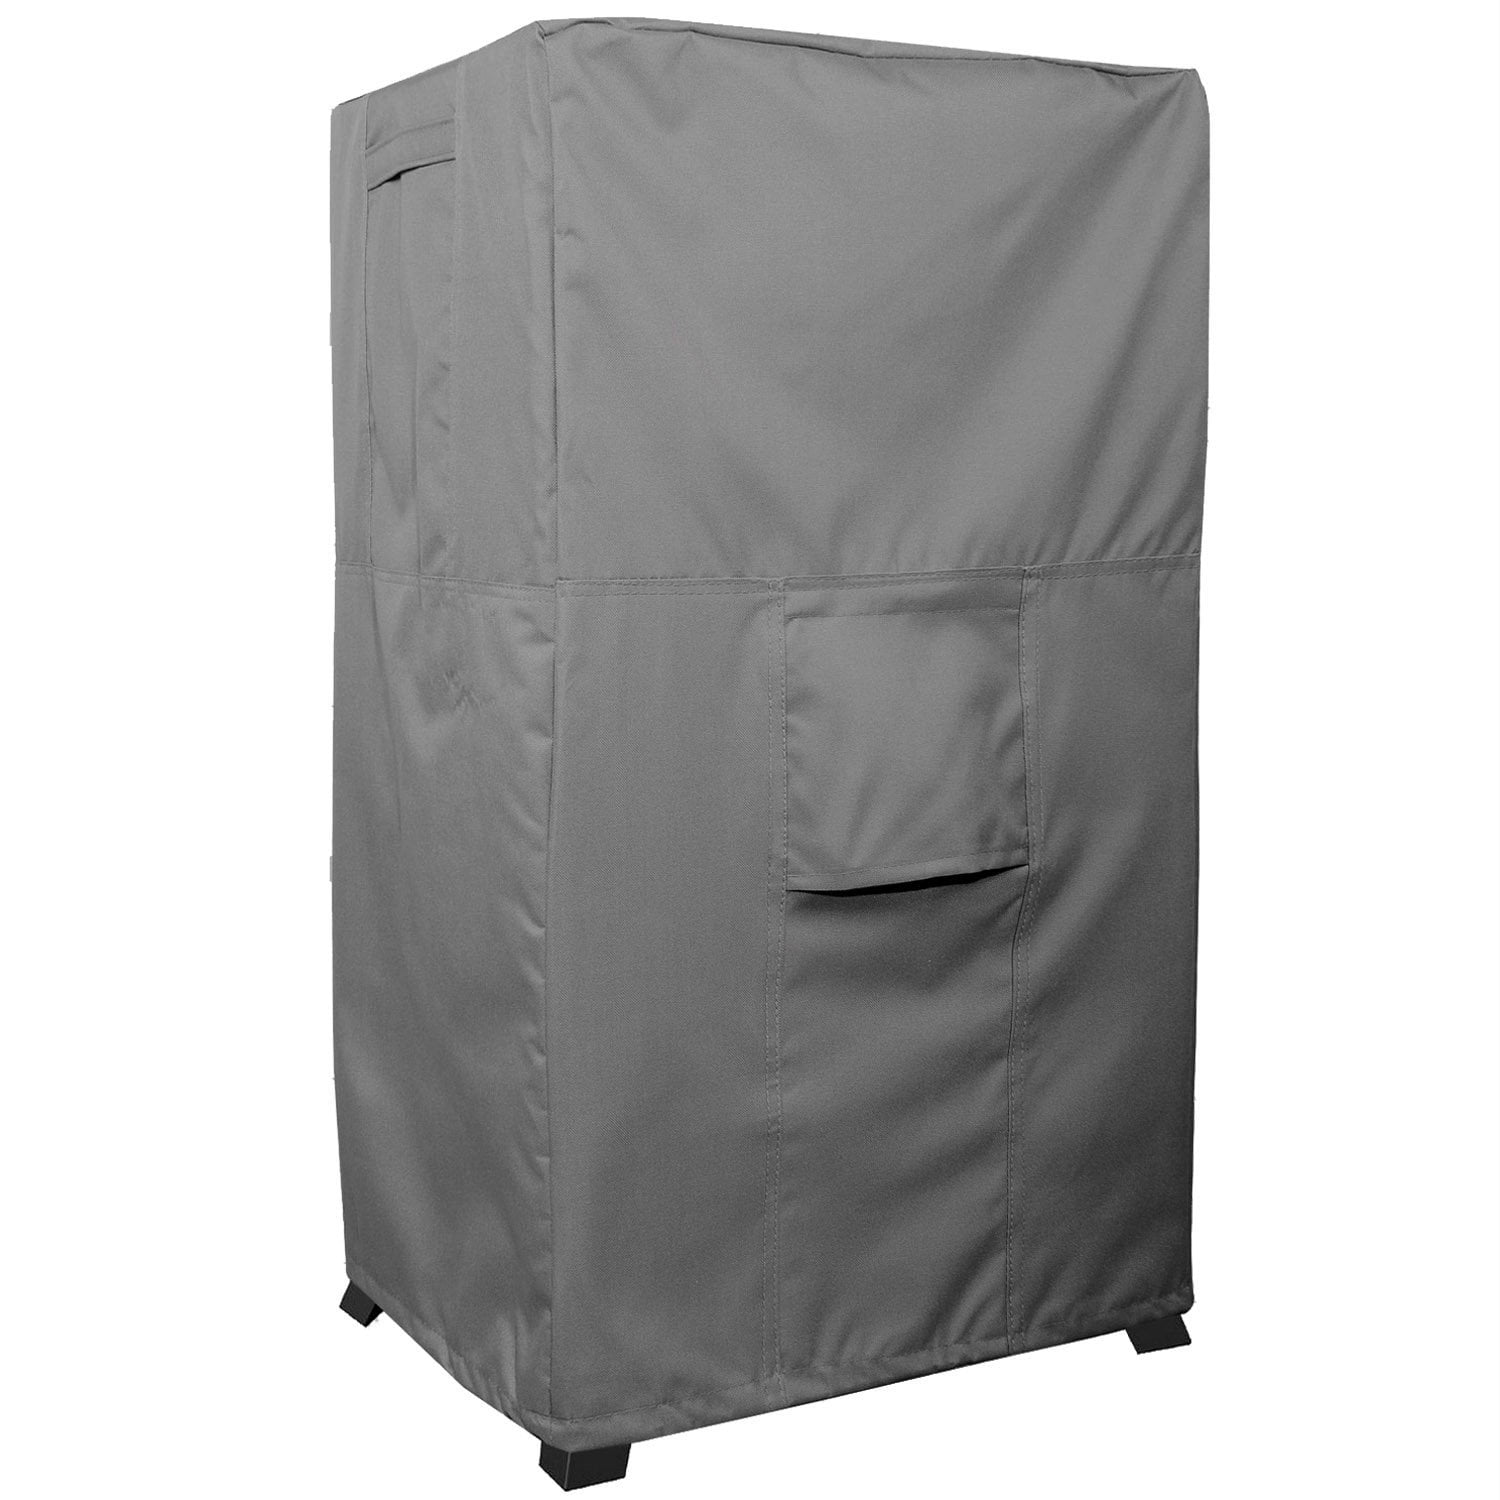 39-Inch Weather Resistant Electric Square Smoker Cover 23"W x 17"D x 39"H Black 